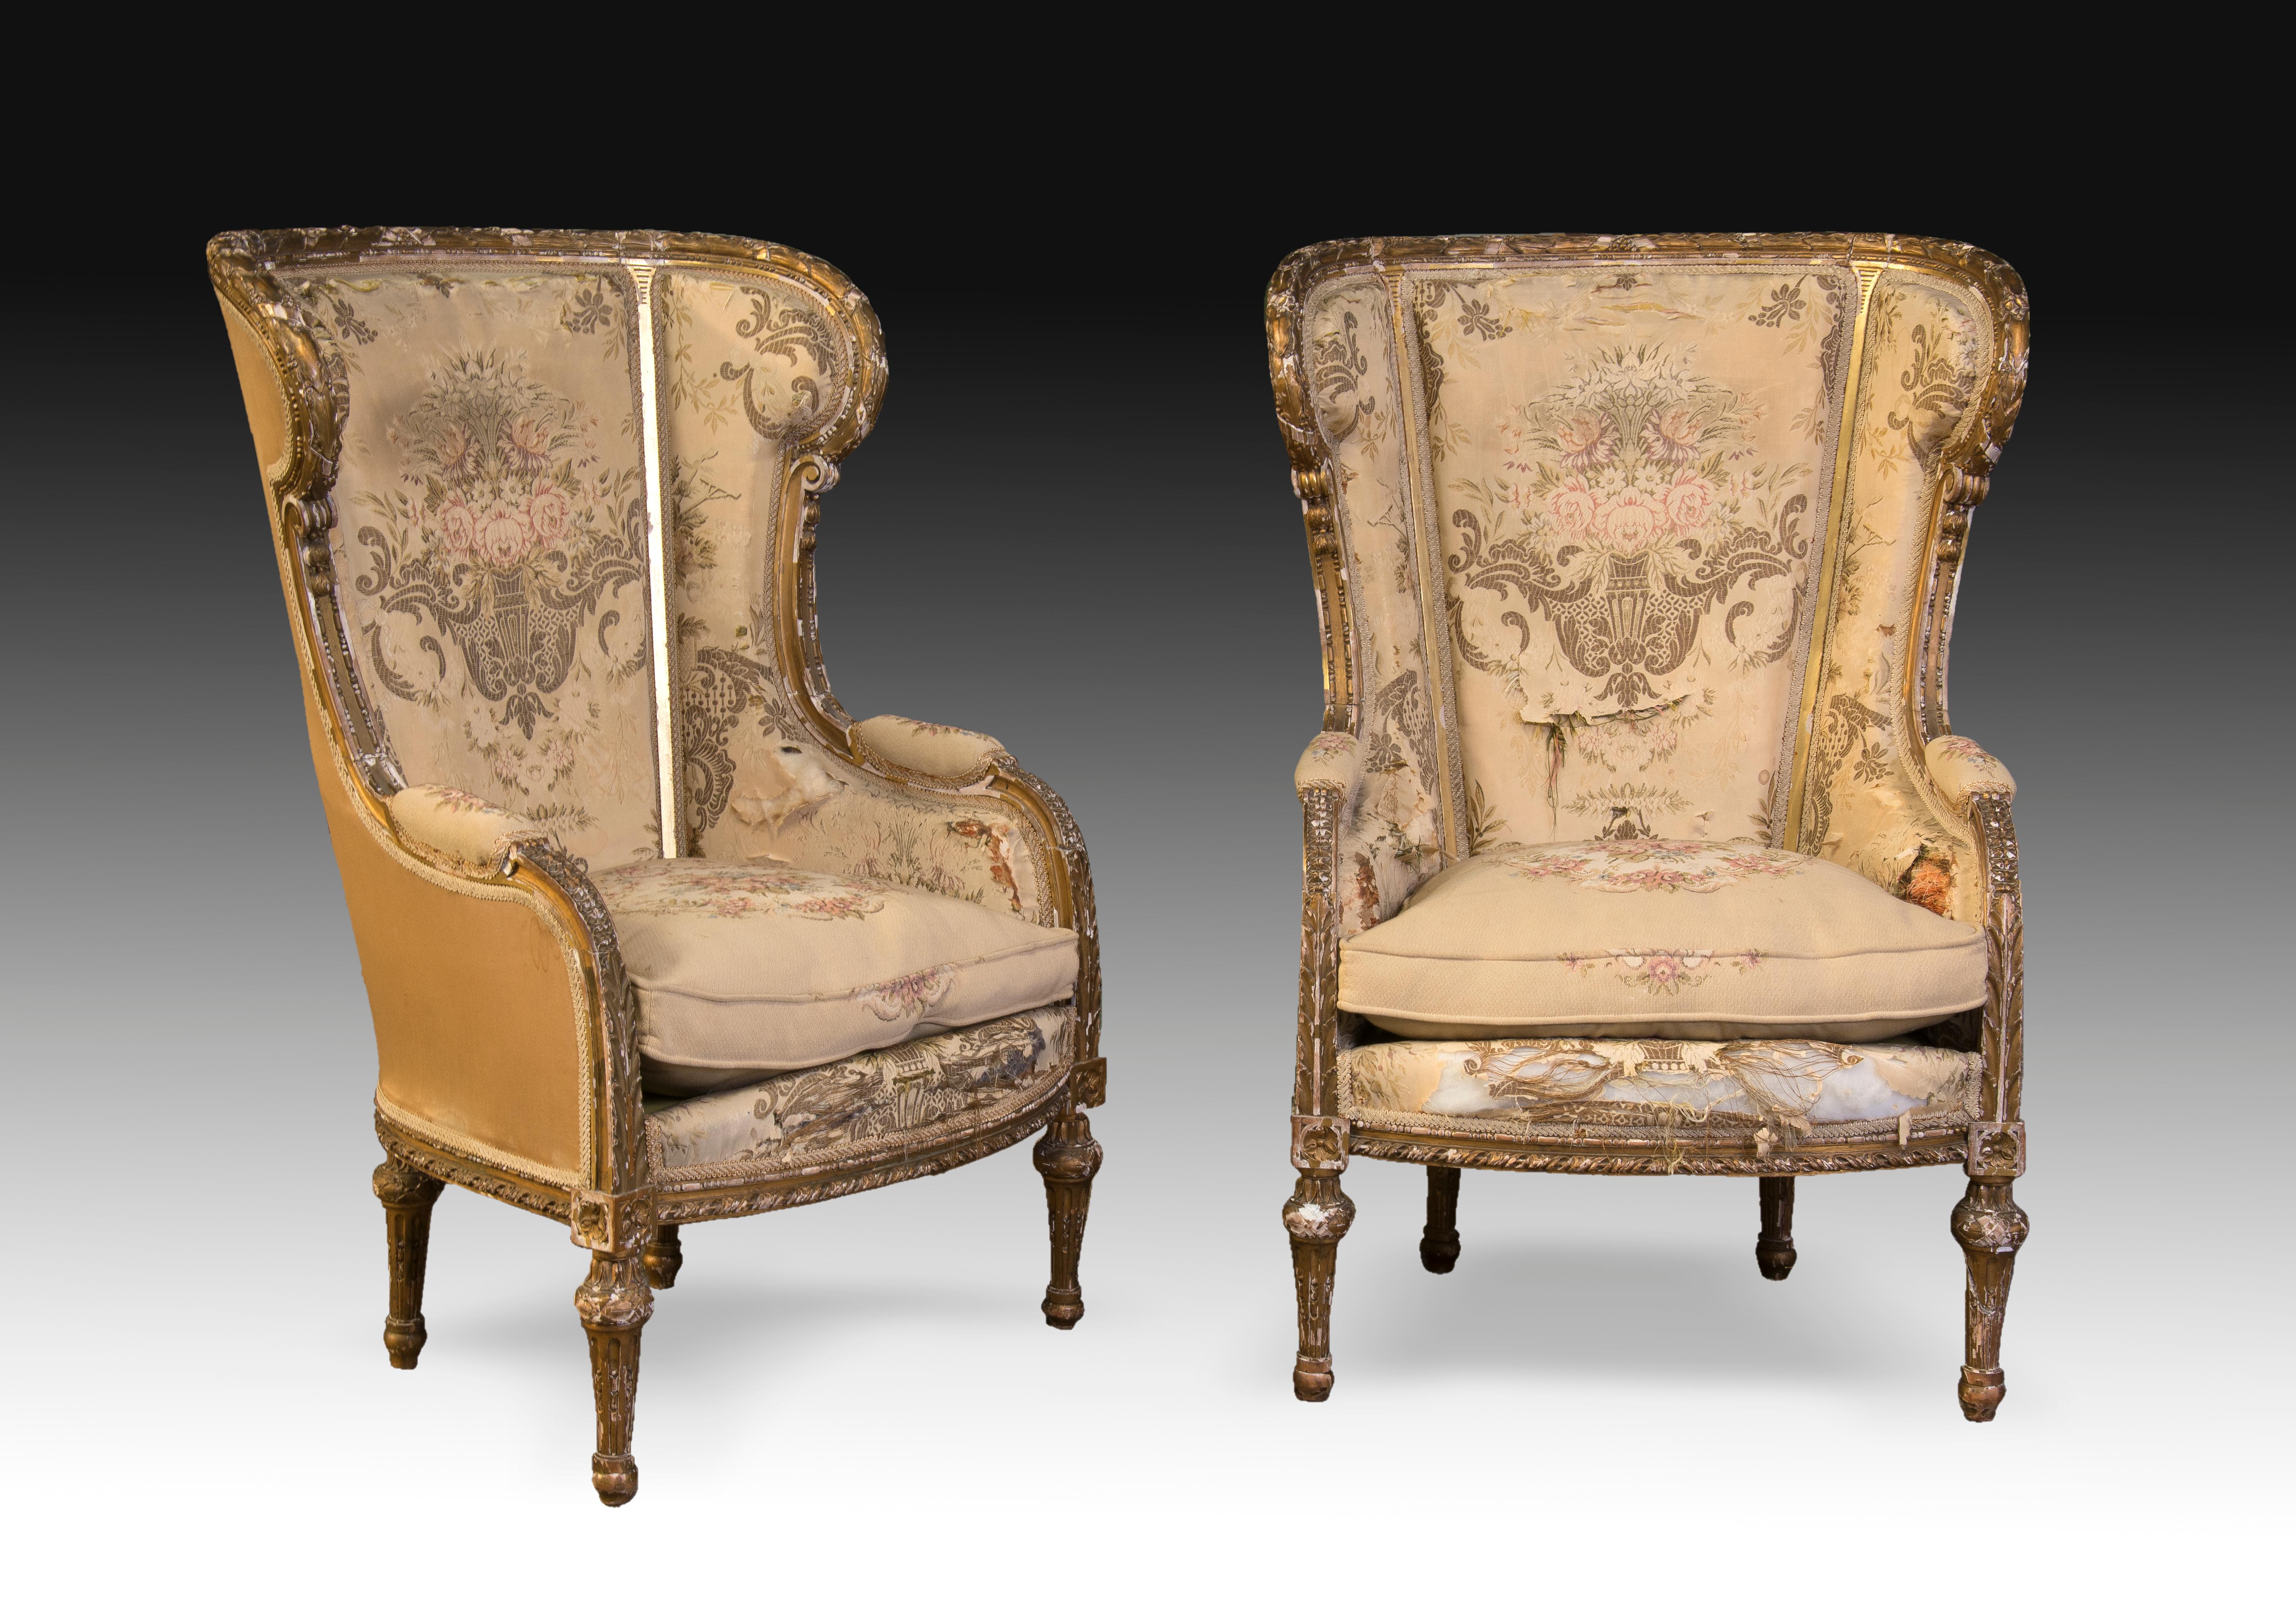 With marks.
They need restoration.
Pair of high-backed armchairs with armrests made of gilded carved wood that have an upholstery in light tones of plant elements accompanied by vases and architectural details of classicist influence. The forms of